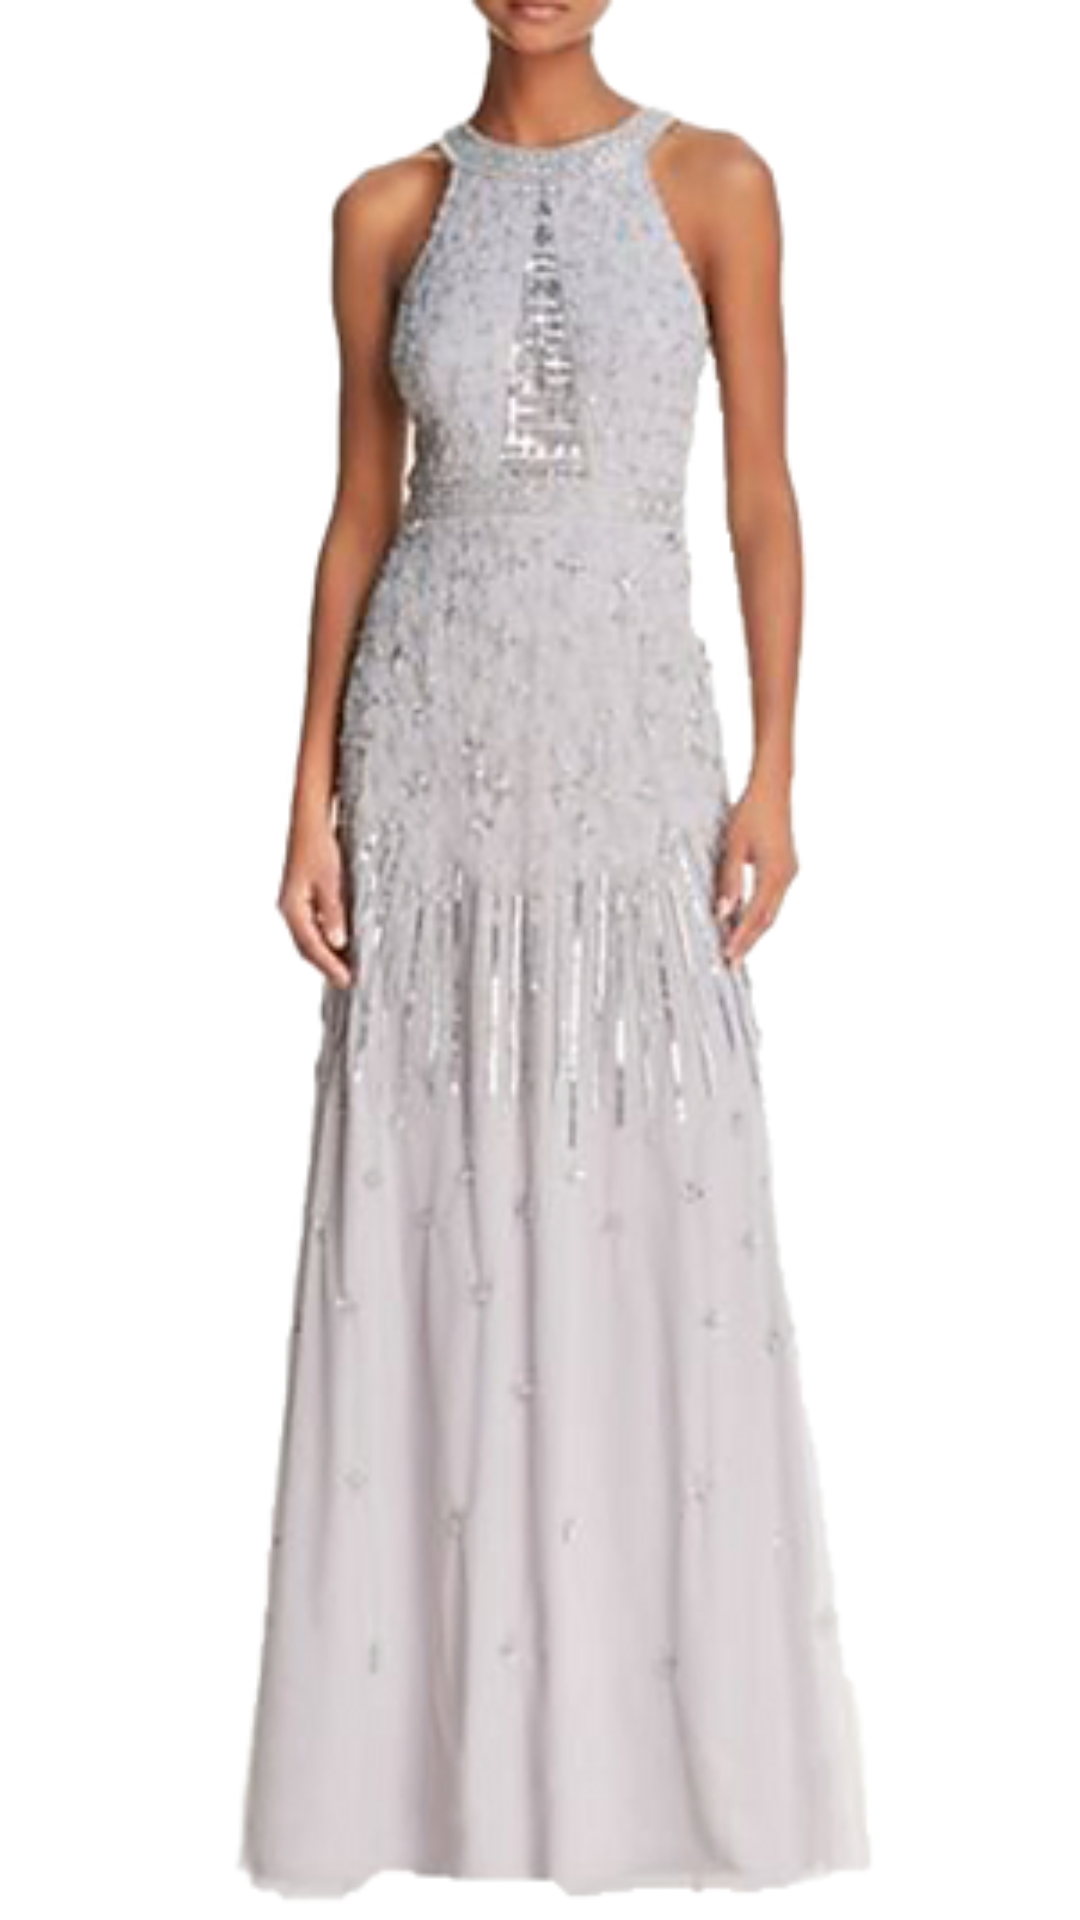 Adrianna Papell Madelyn Beaded Halter Gown in Silver